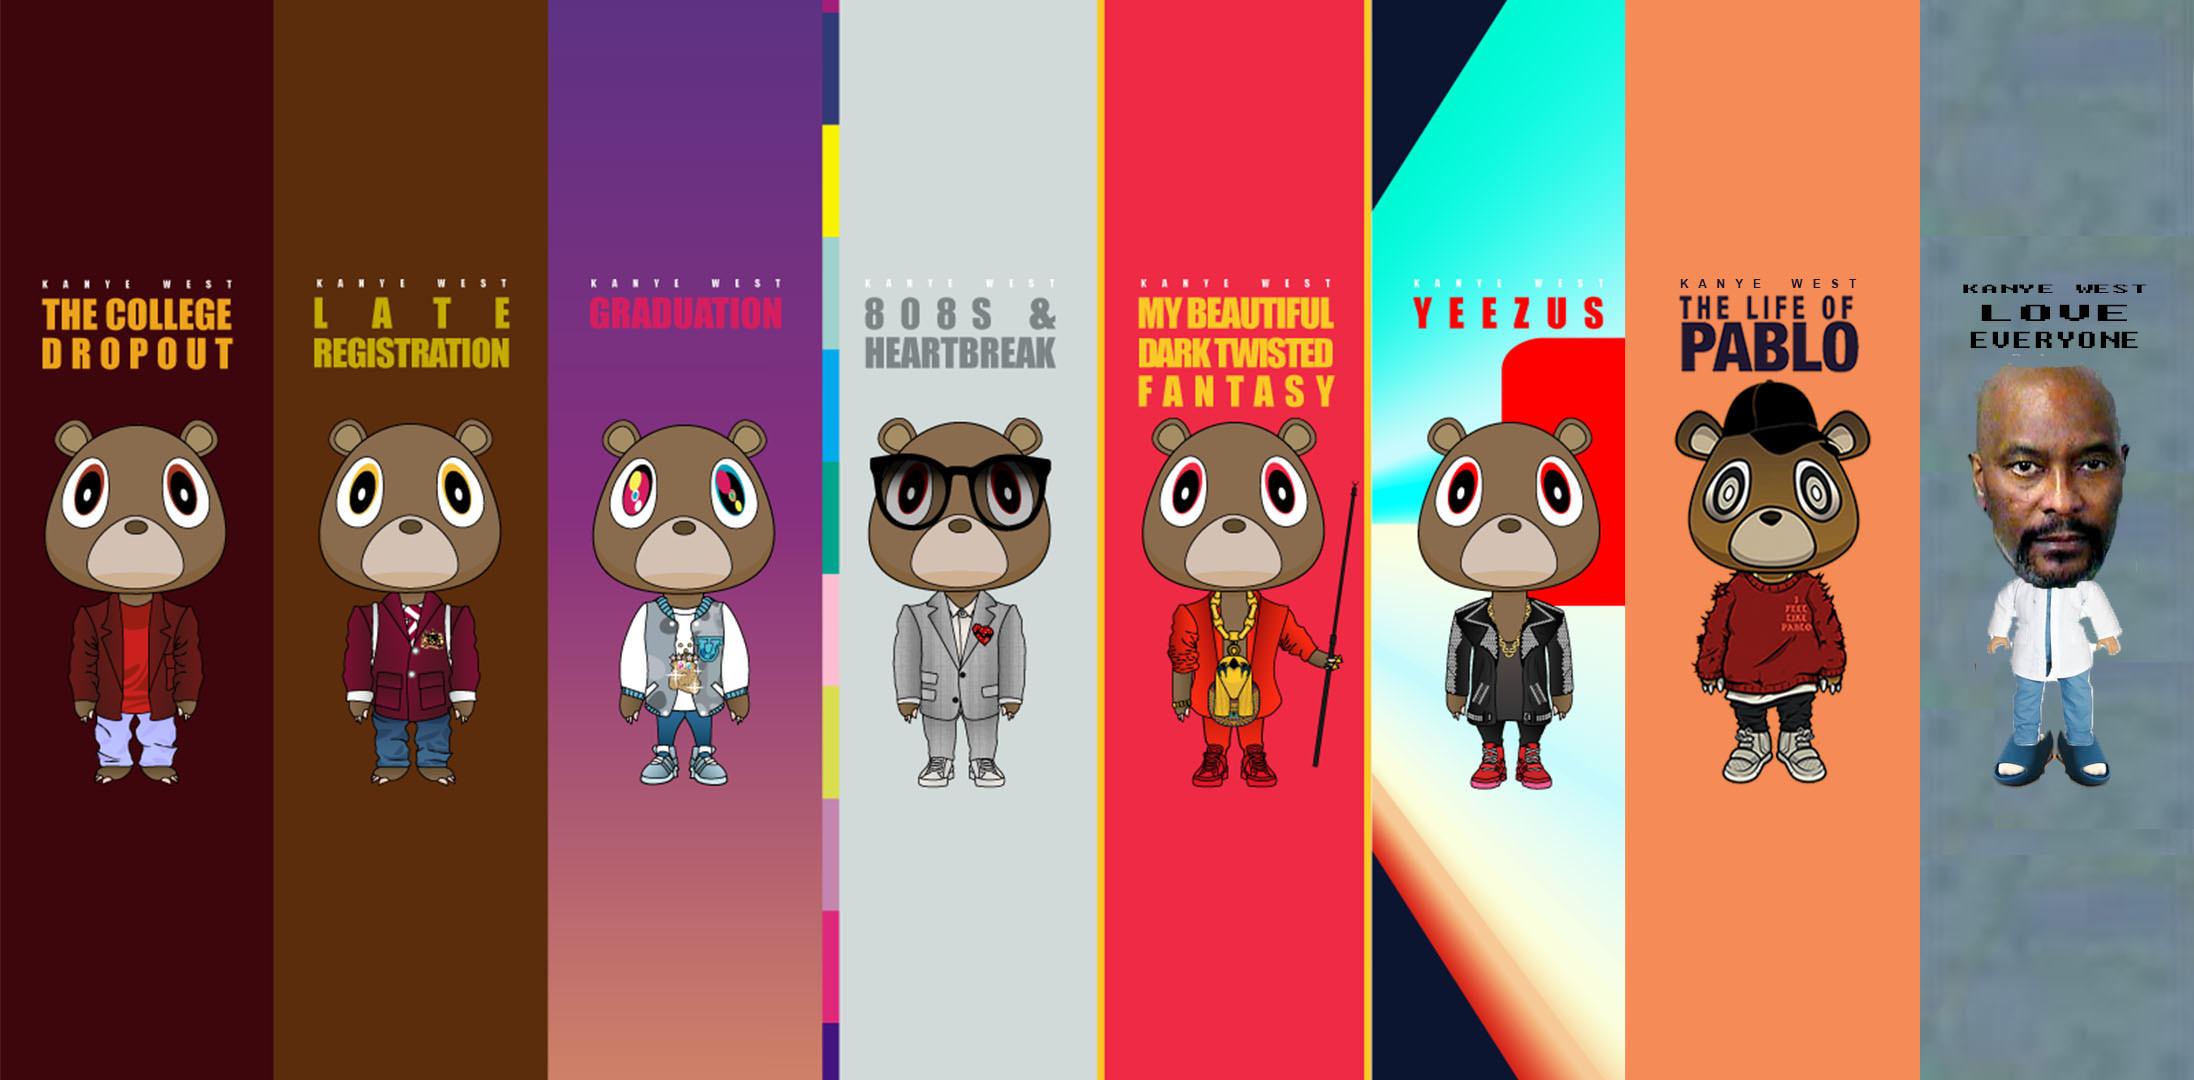 kanye west 808s and heartbreak free download